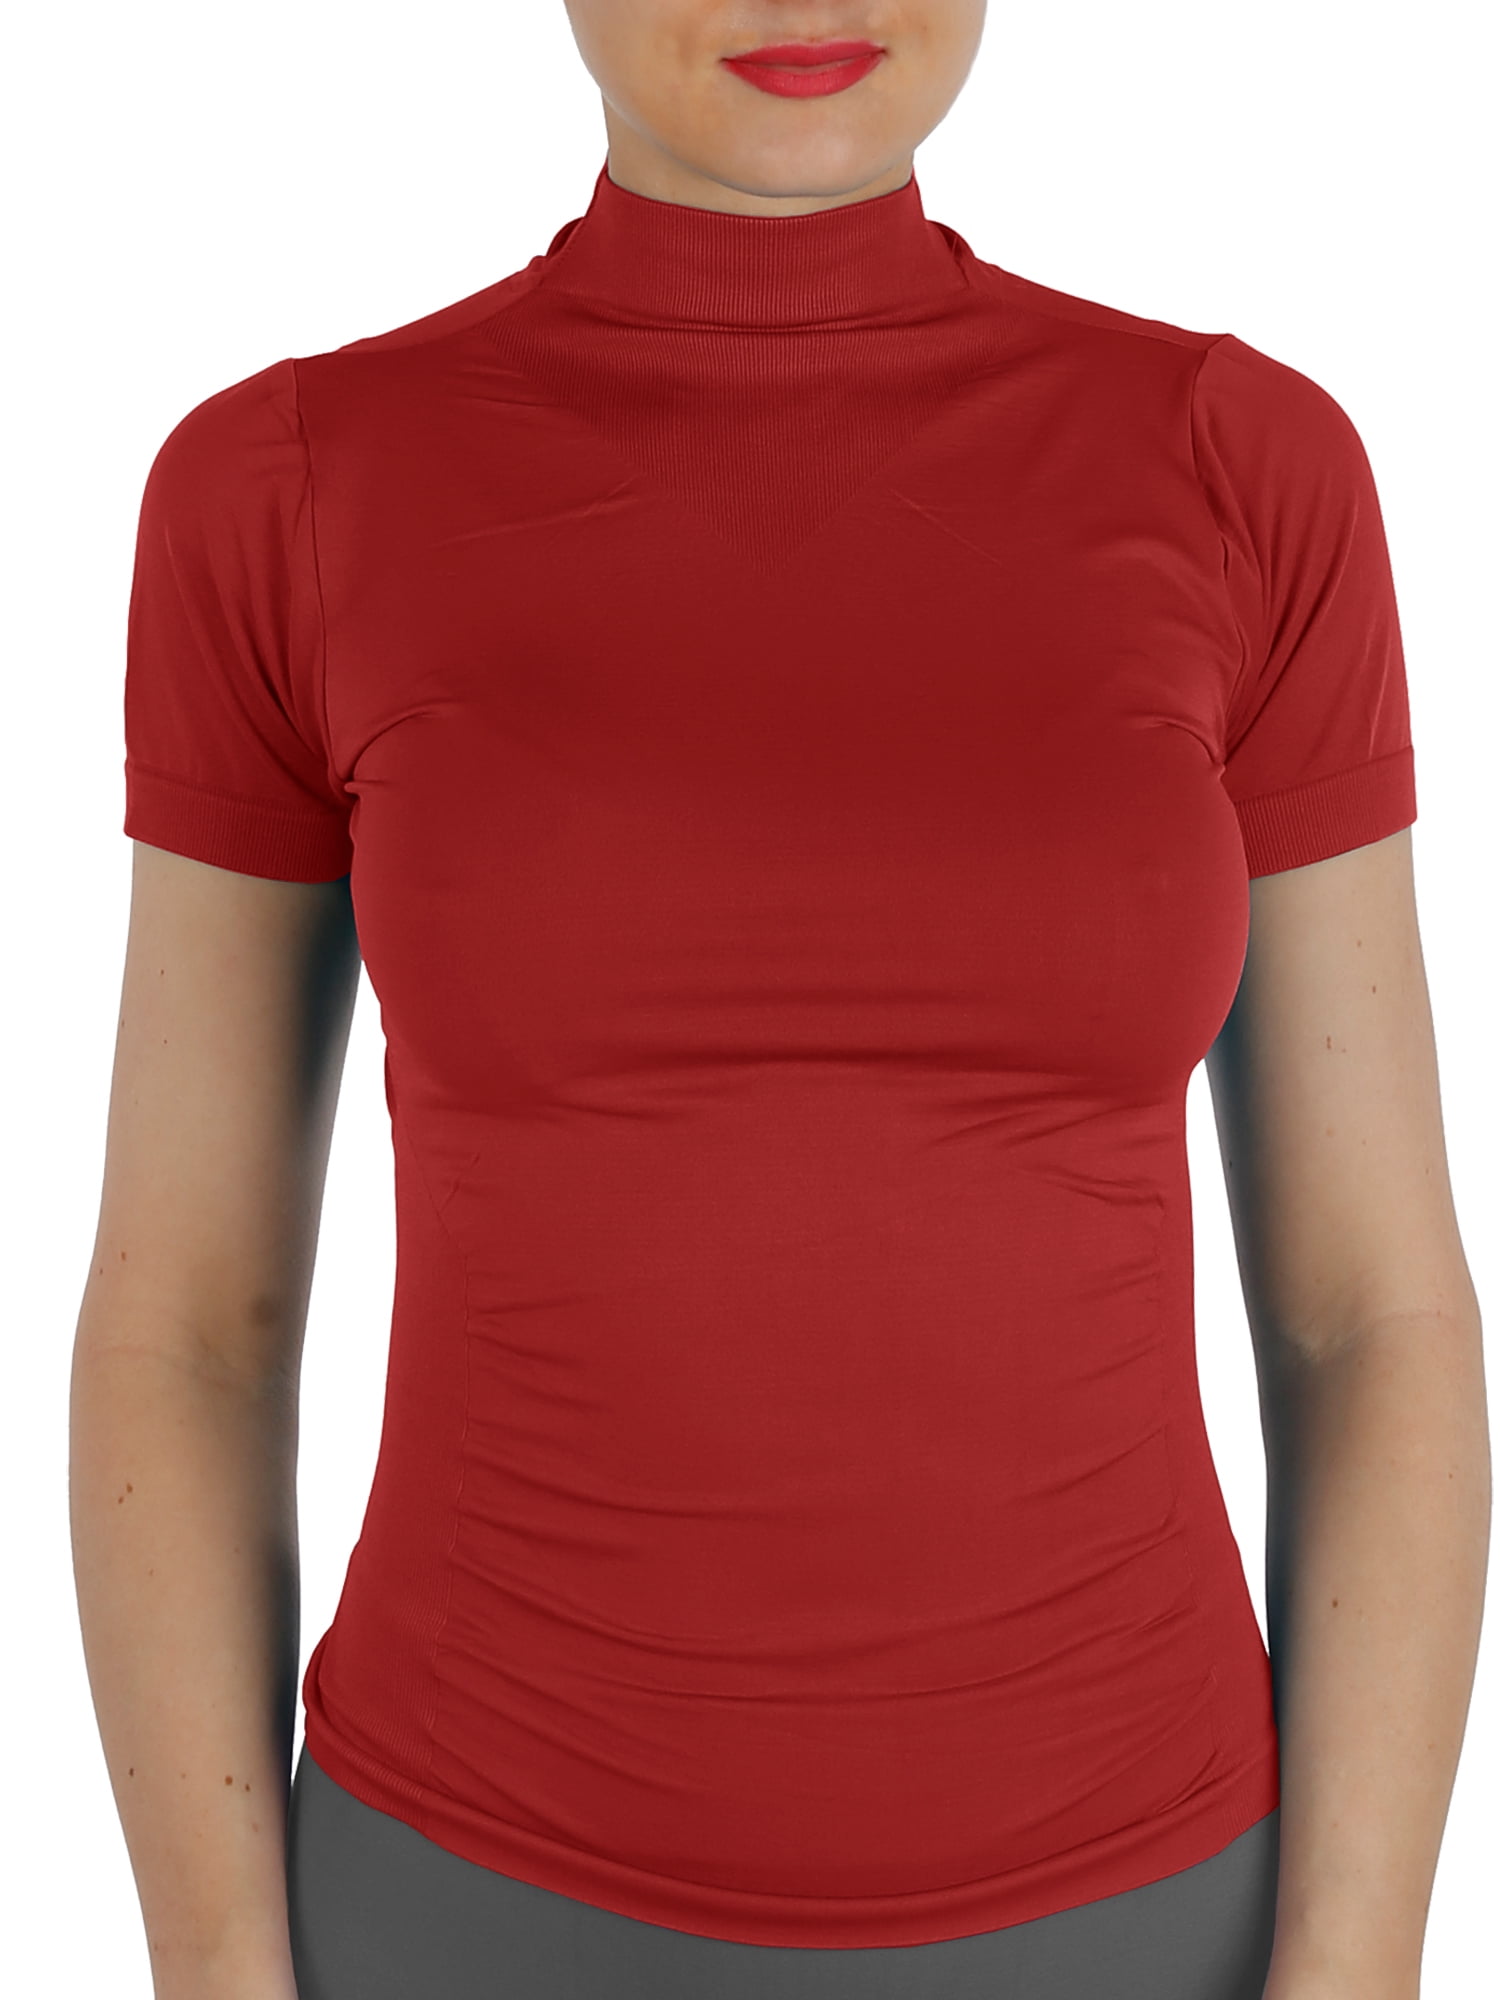 Simple Mock neck workout top for Fat Body